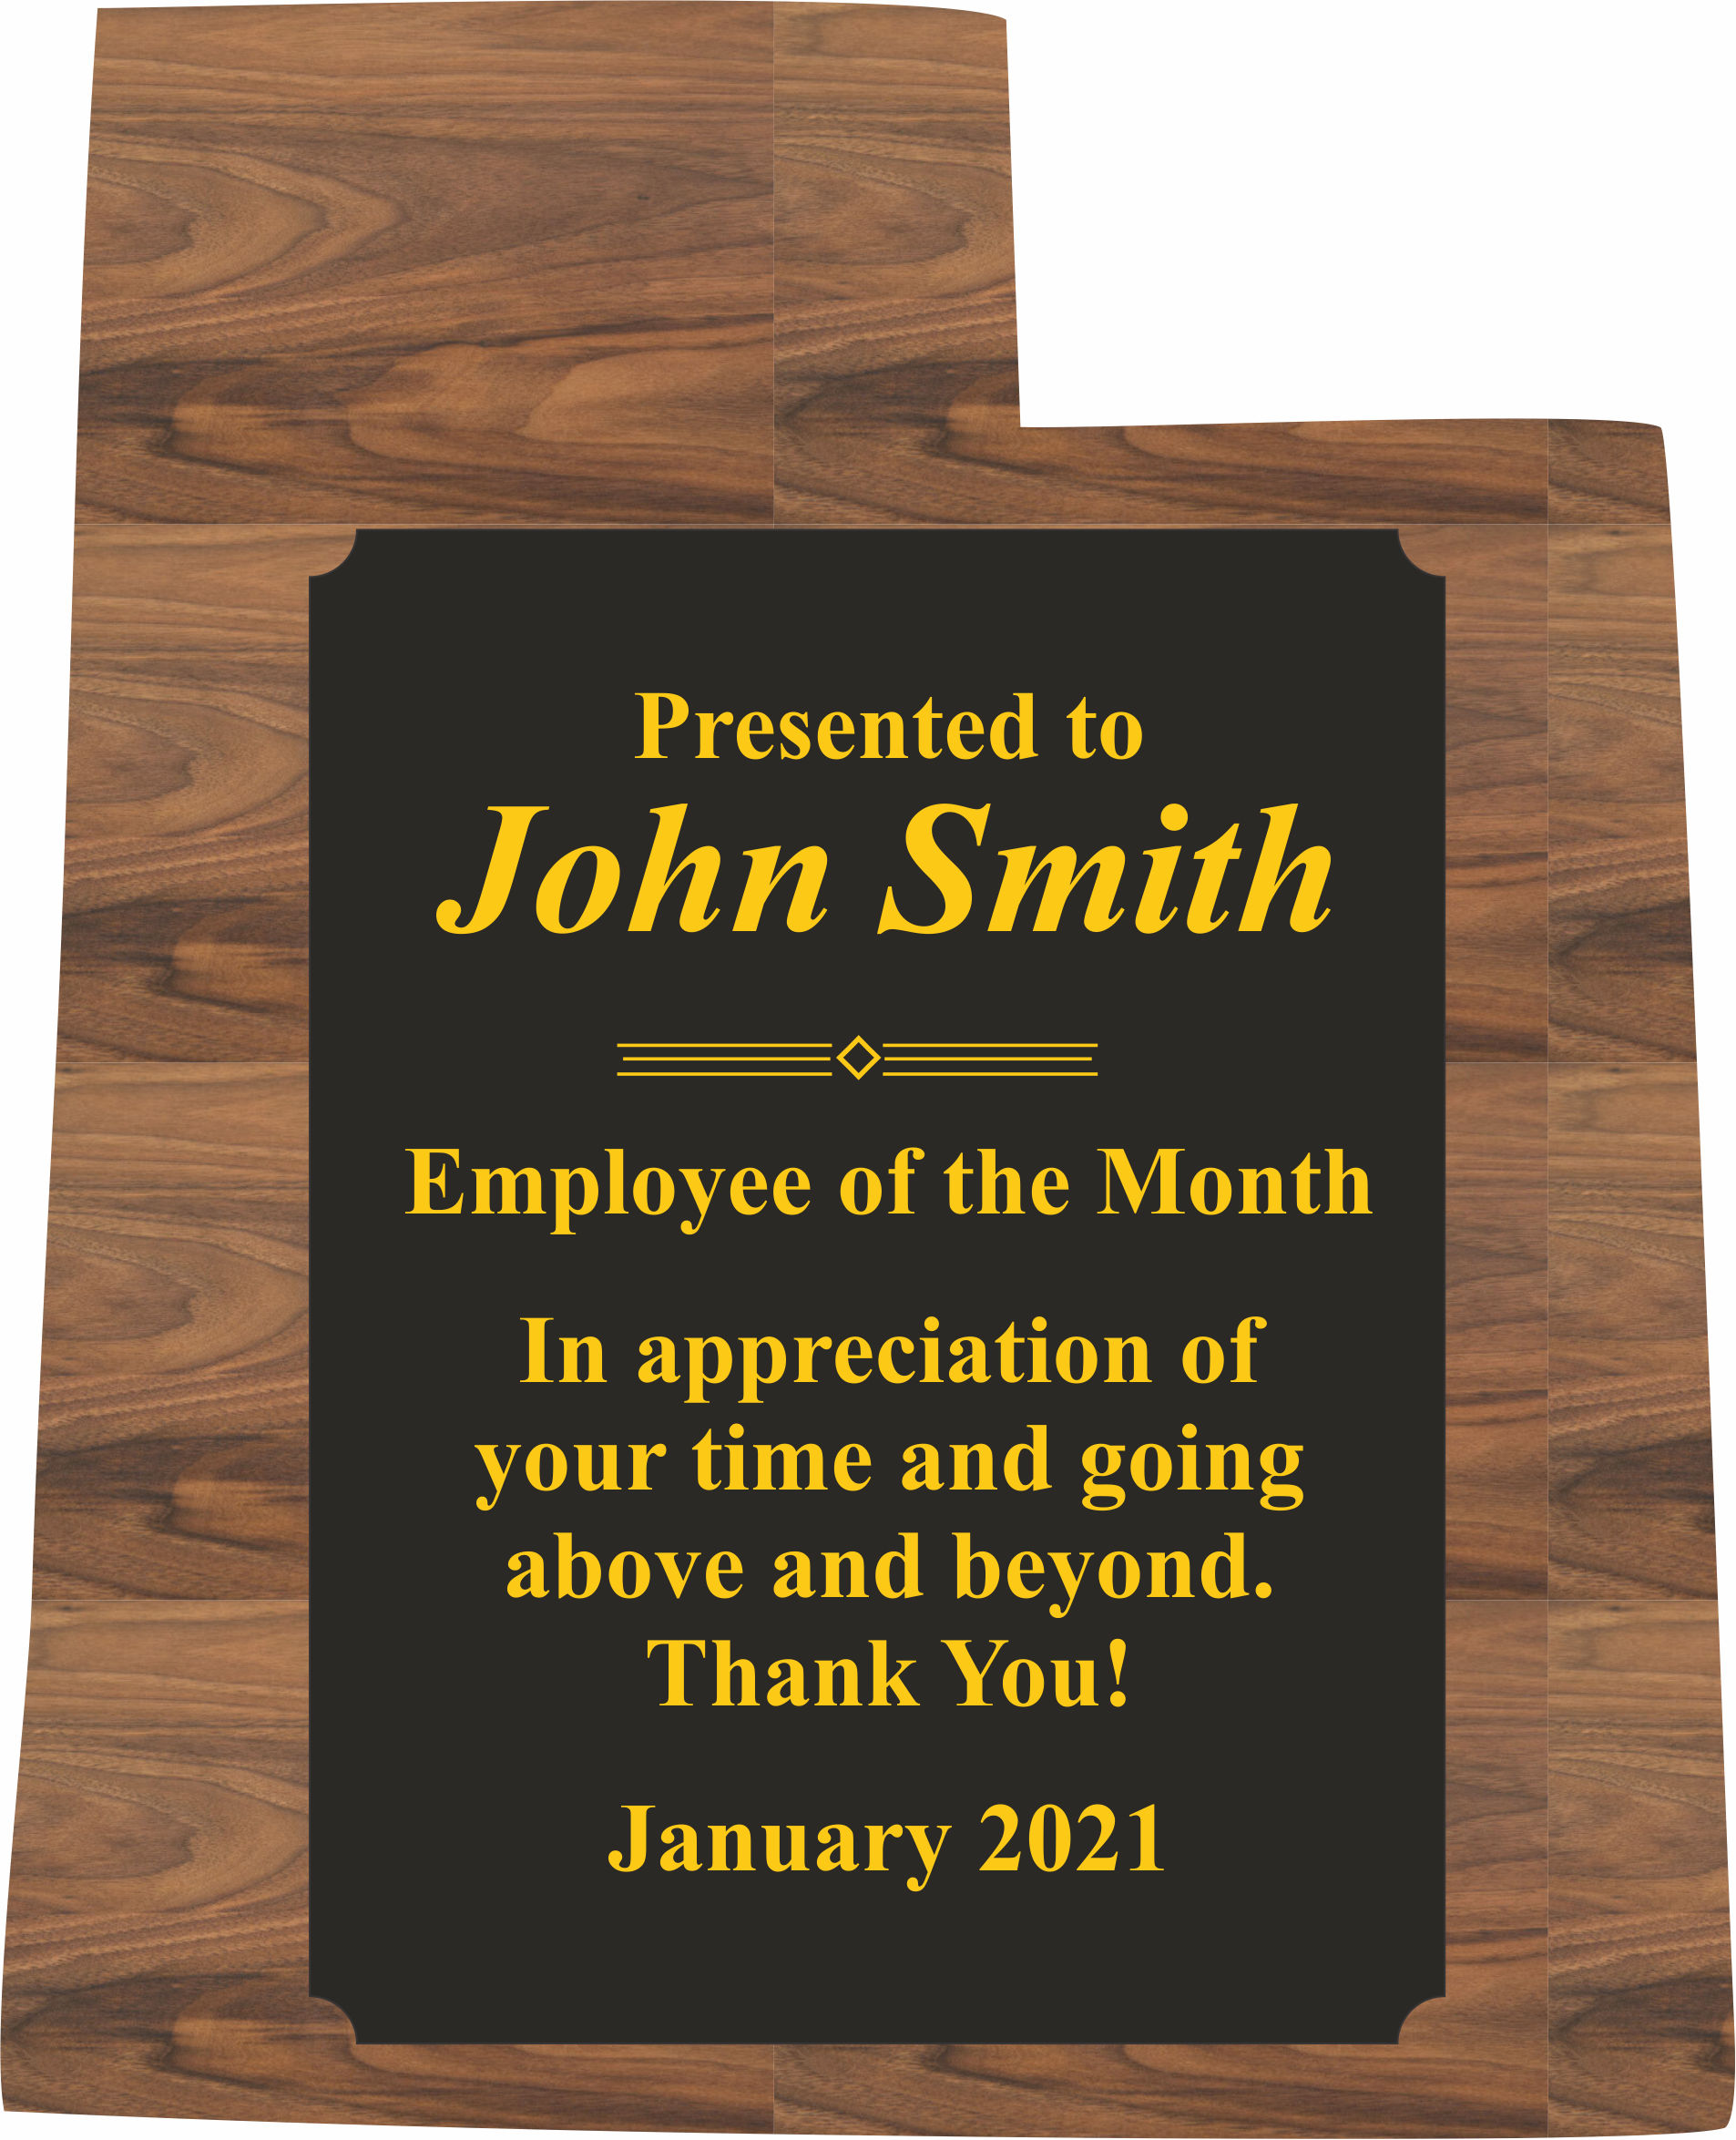 Utah State Shaped Plaques, Custom Engraved With Your Logo!